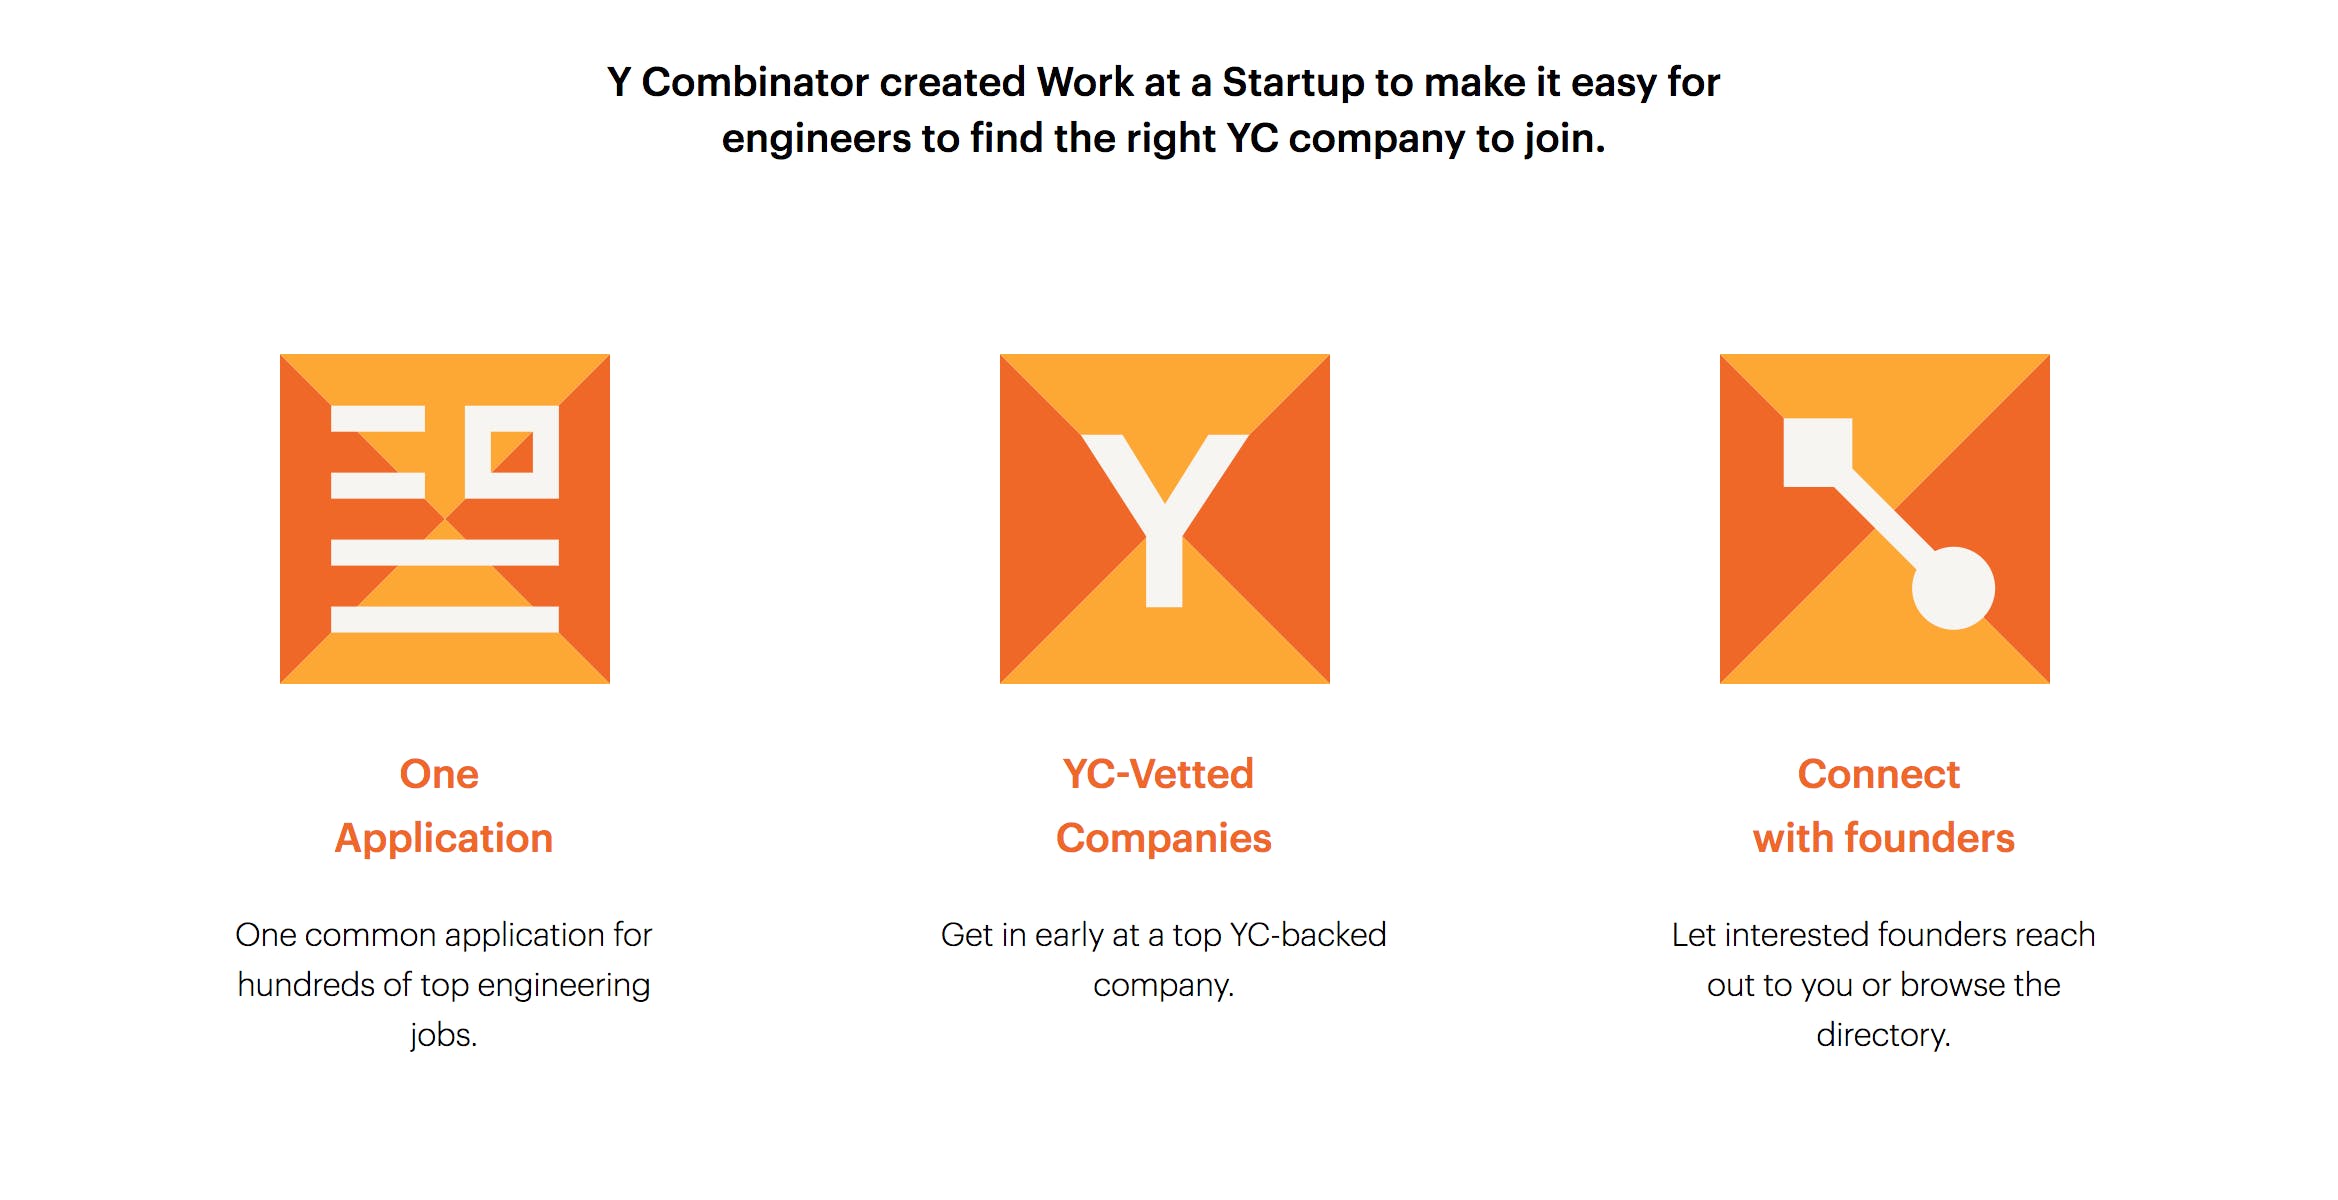 Work at a Startup - from Y Combinator media 2